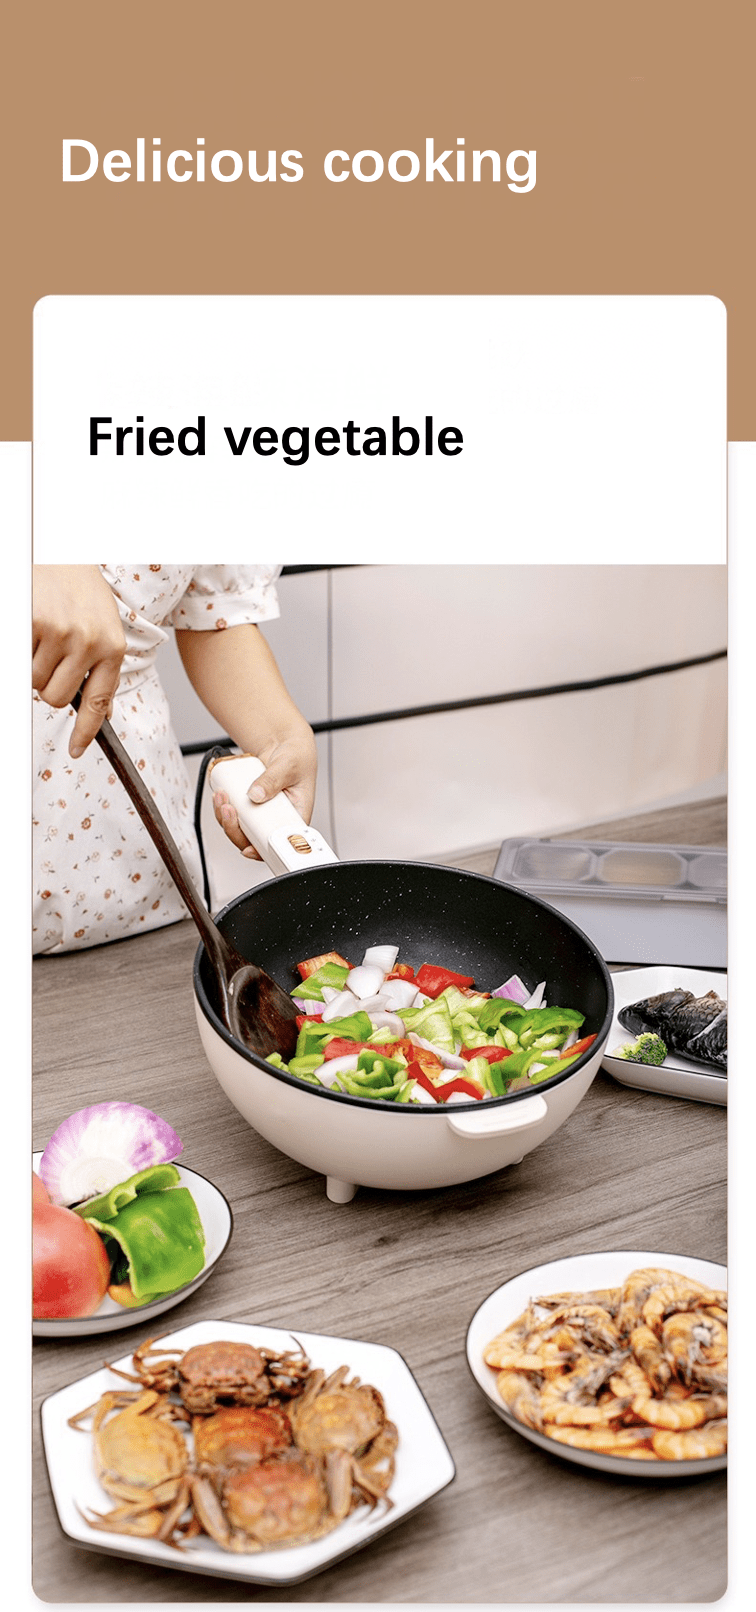 700W Multifunctional non-stick electric cooker frying pan 3L smart version  double layer large capacity electric skillet